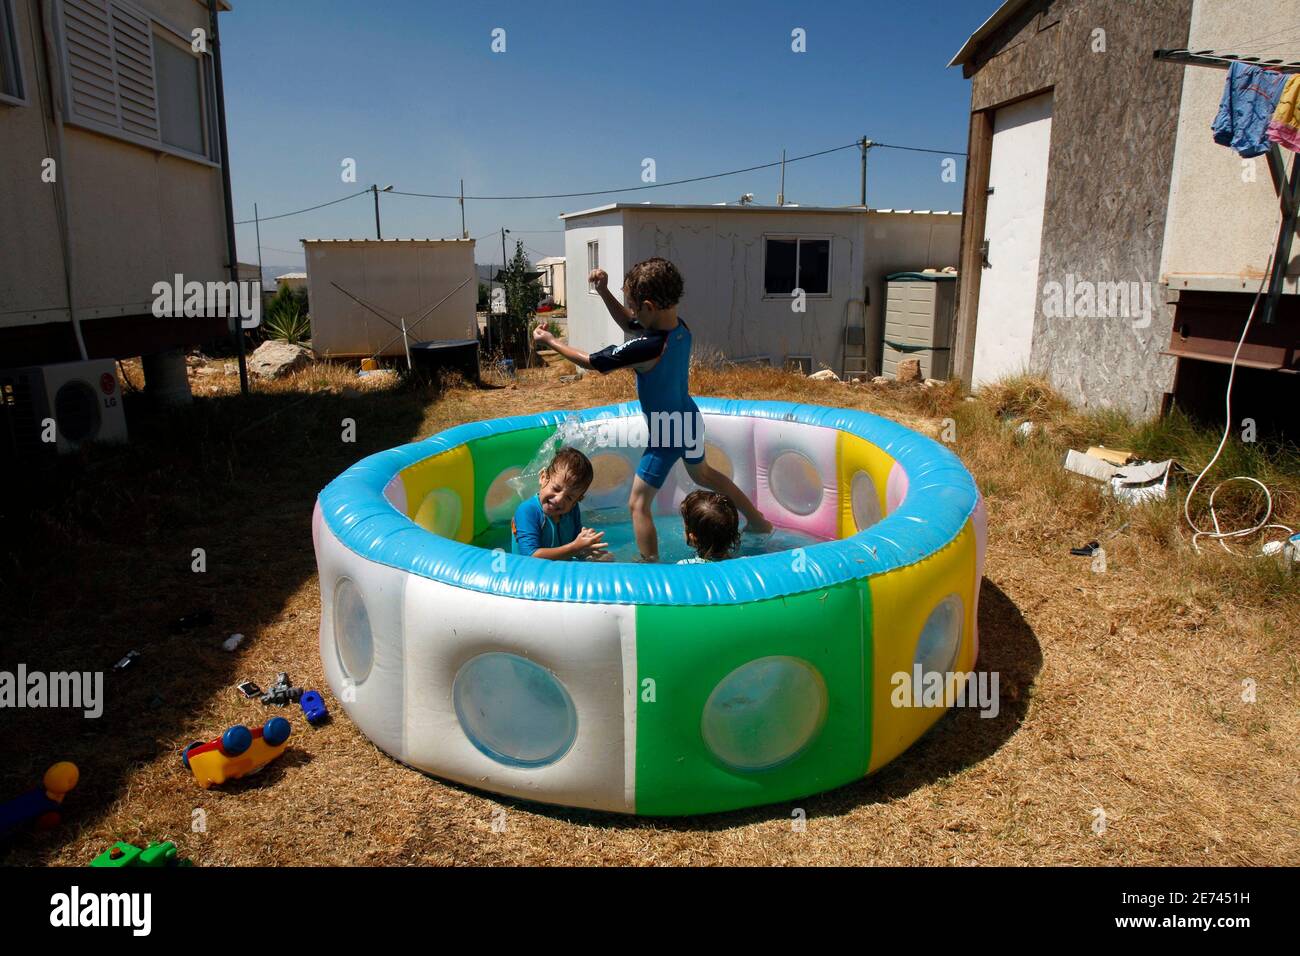 Jewish settler children play in an inflatable pool at the Migron outpost near the West Bank city of Ramallah August 12, 2008. Israel will expand a Jewish enclave in the occupied West Bank to absorb dozens of settlers listed for eviction from the hilltop outpost, built six years ago without government authorisation, an official said on Tuesday. REUTERS/Baz Ratner (WEST BANK) Stock Photo